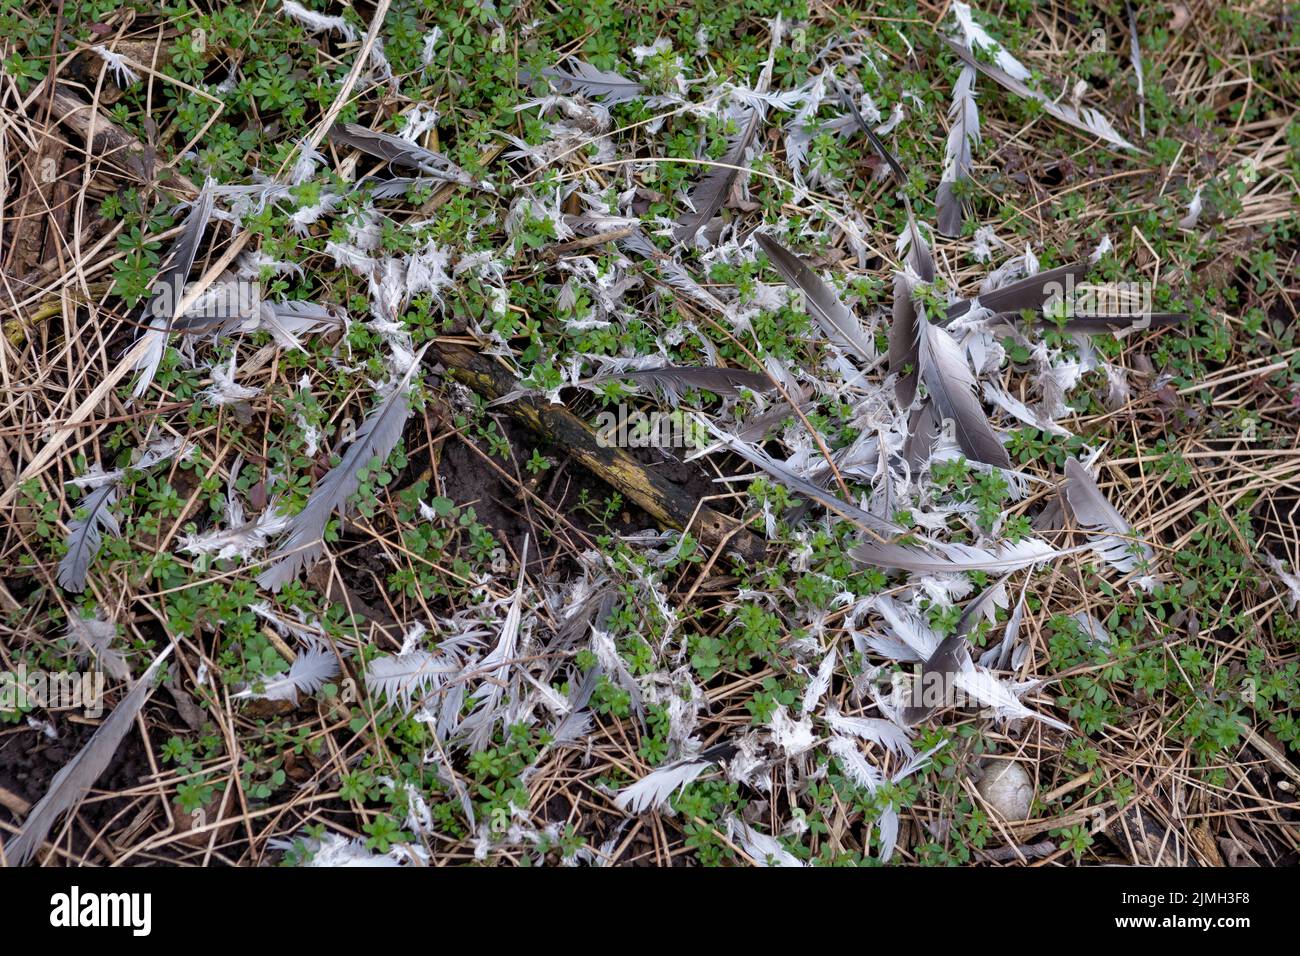 Tattered bird feathers on the ground in the forest. Bird caught by predator. Stock Photo